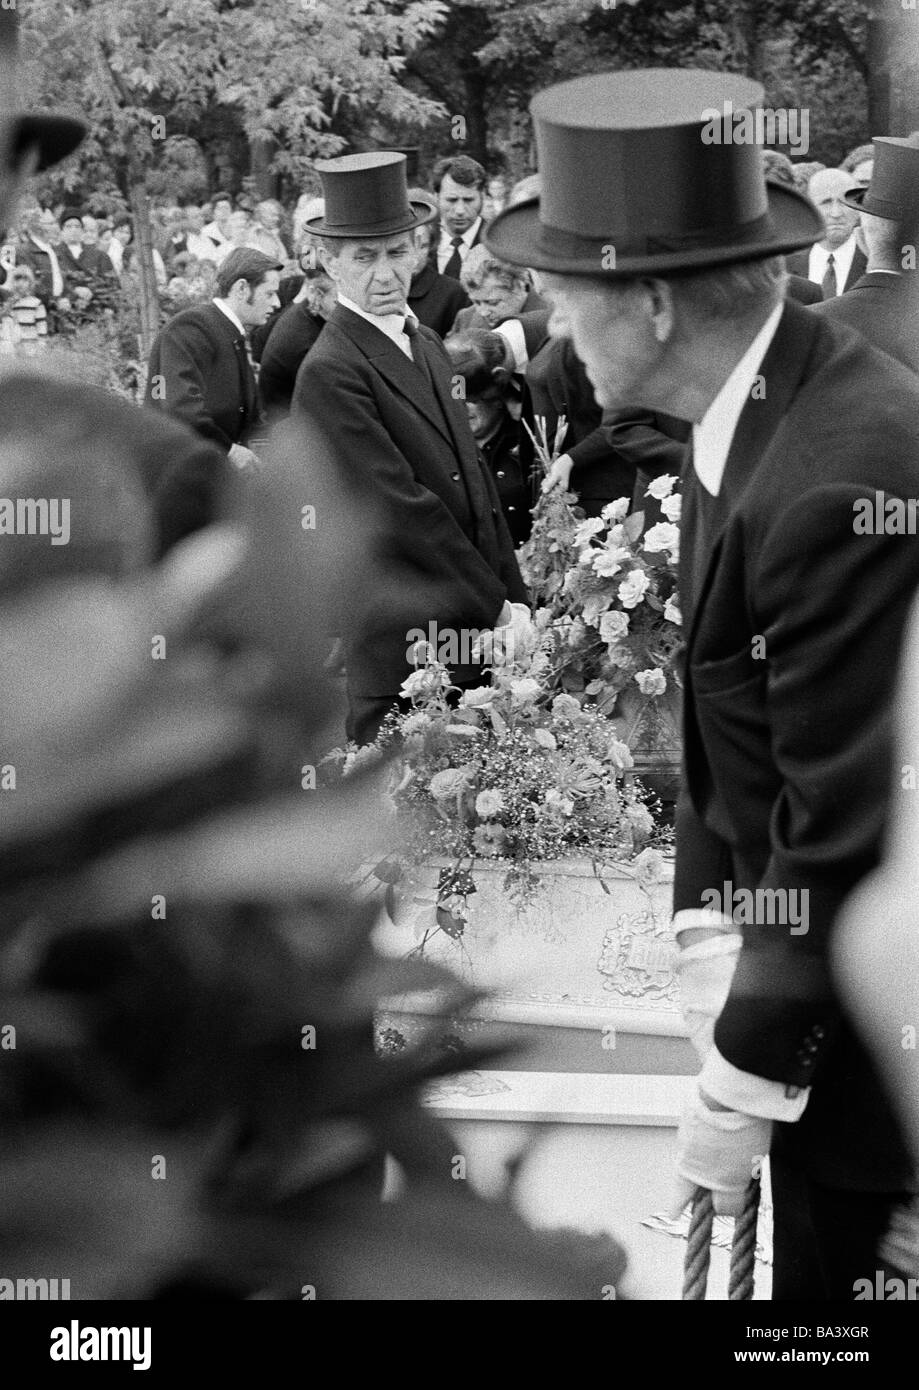 Seventies, black and white photo, people, death, burial, mourning, pallbearer, casket, mourning clothes, silk hat, black garment, black necktie, aged 50 to 70 years Stock Photo